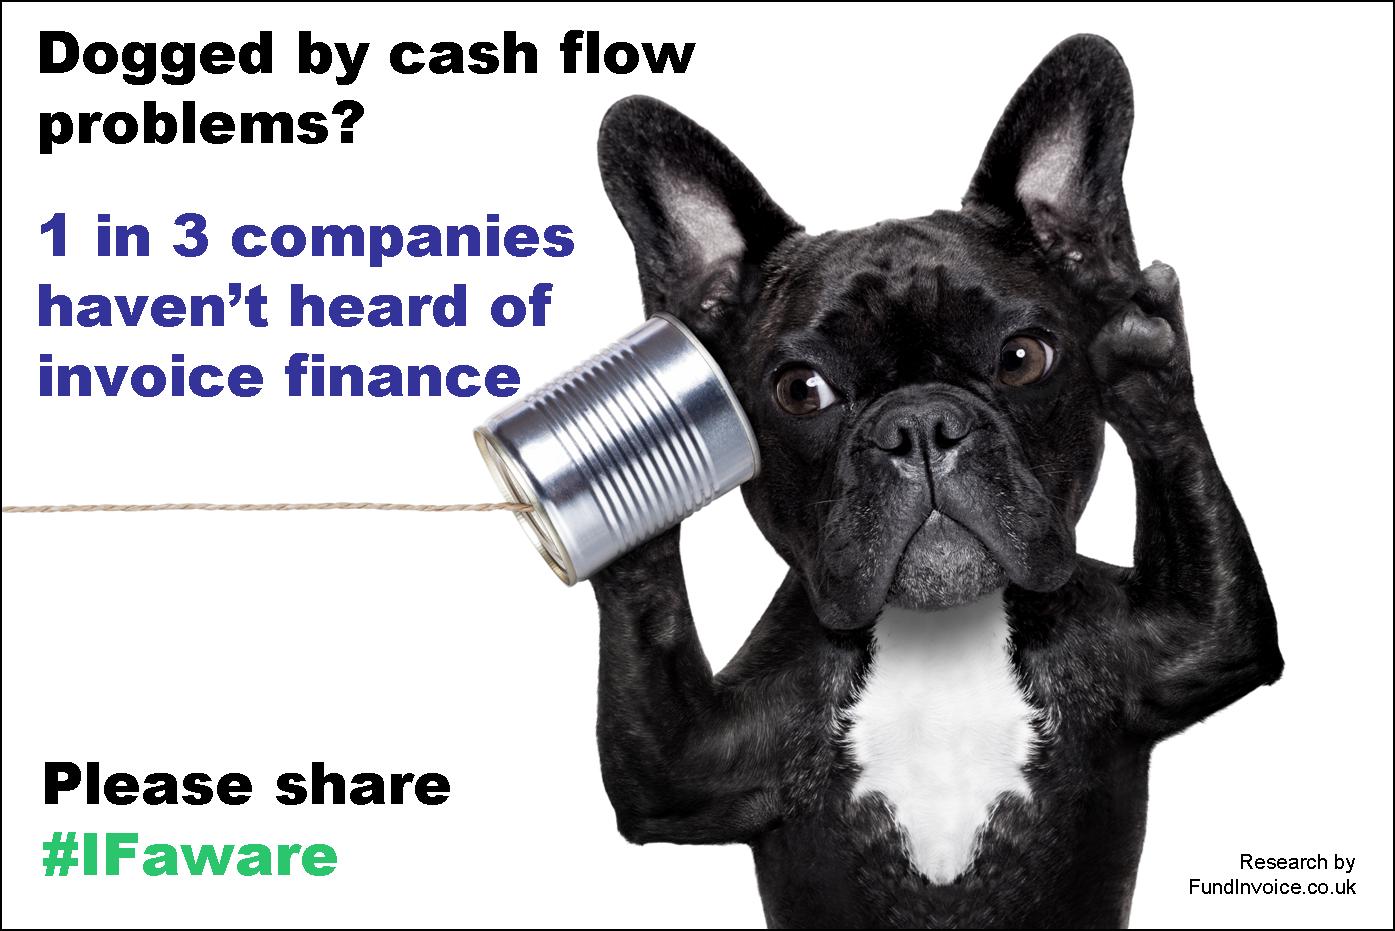 Are you dogged by cash flow problems? Have you heard of invoice finance?